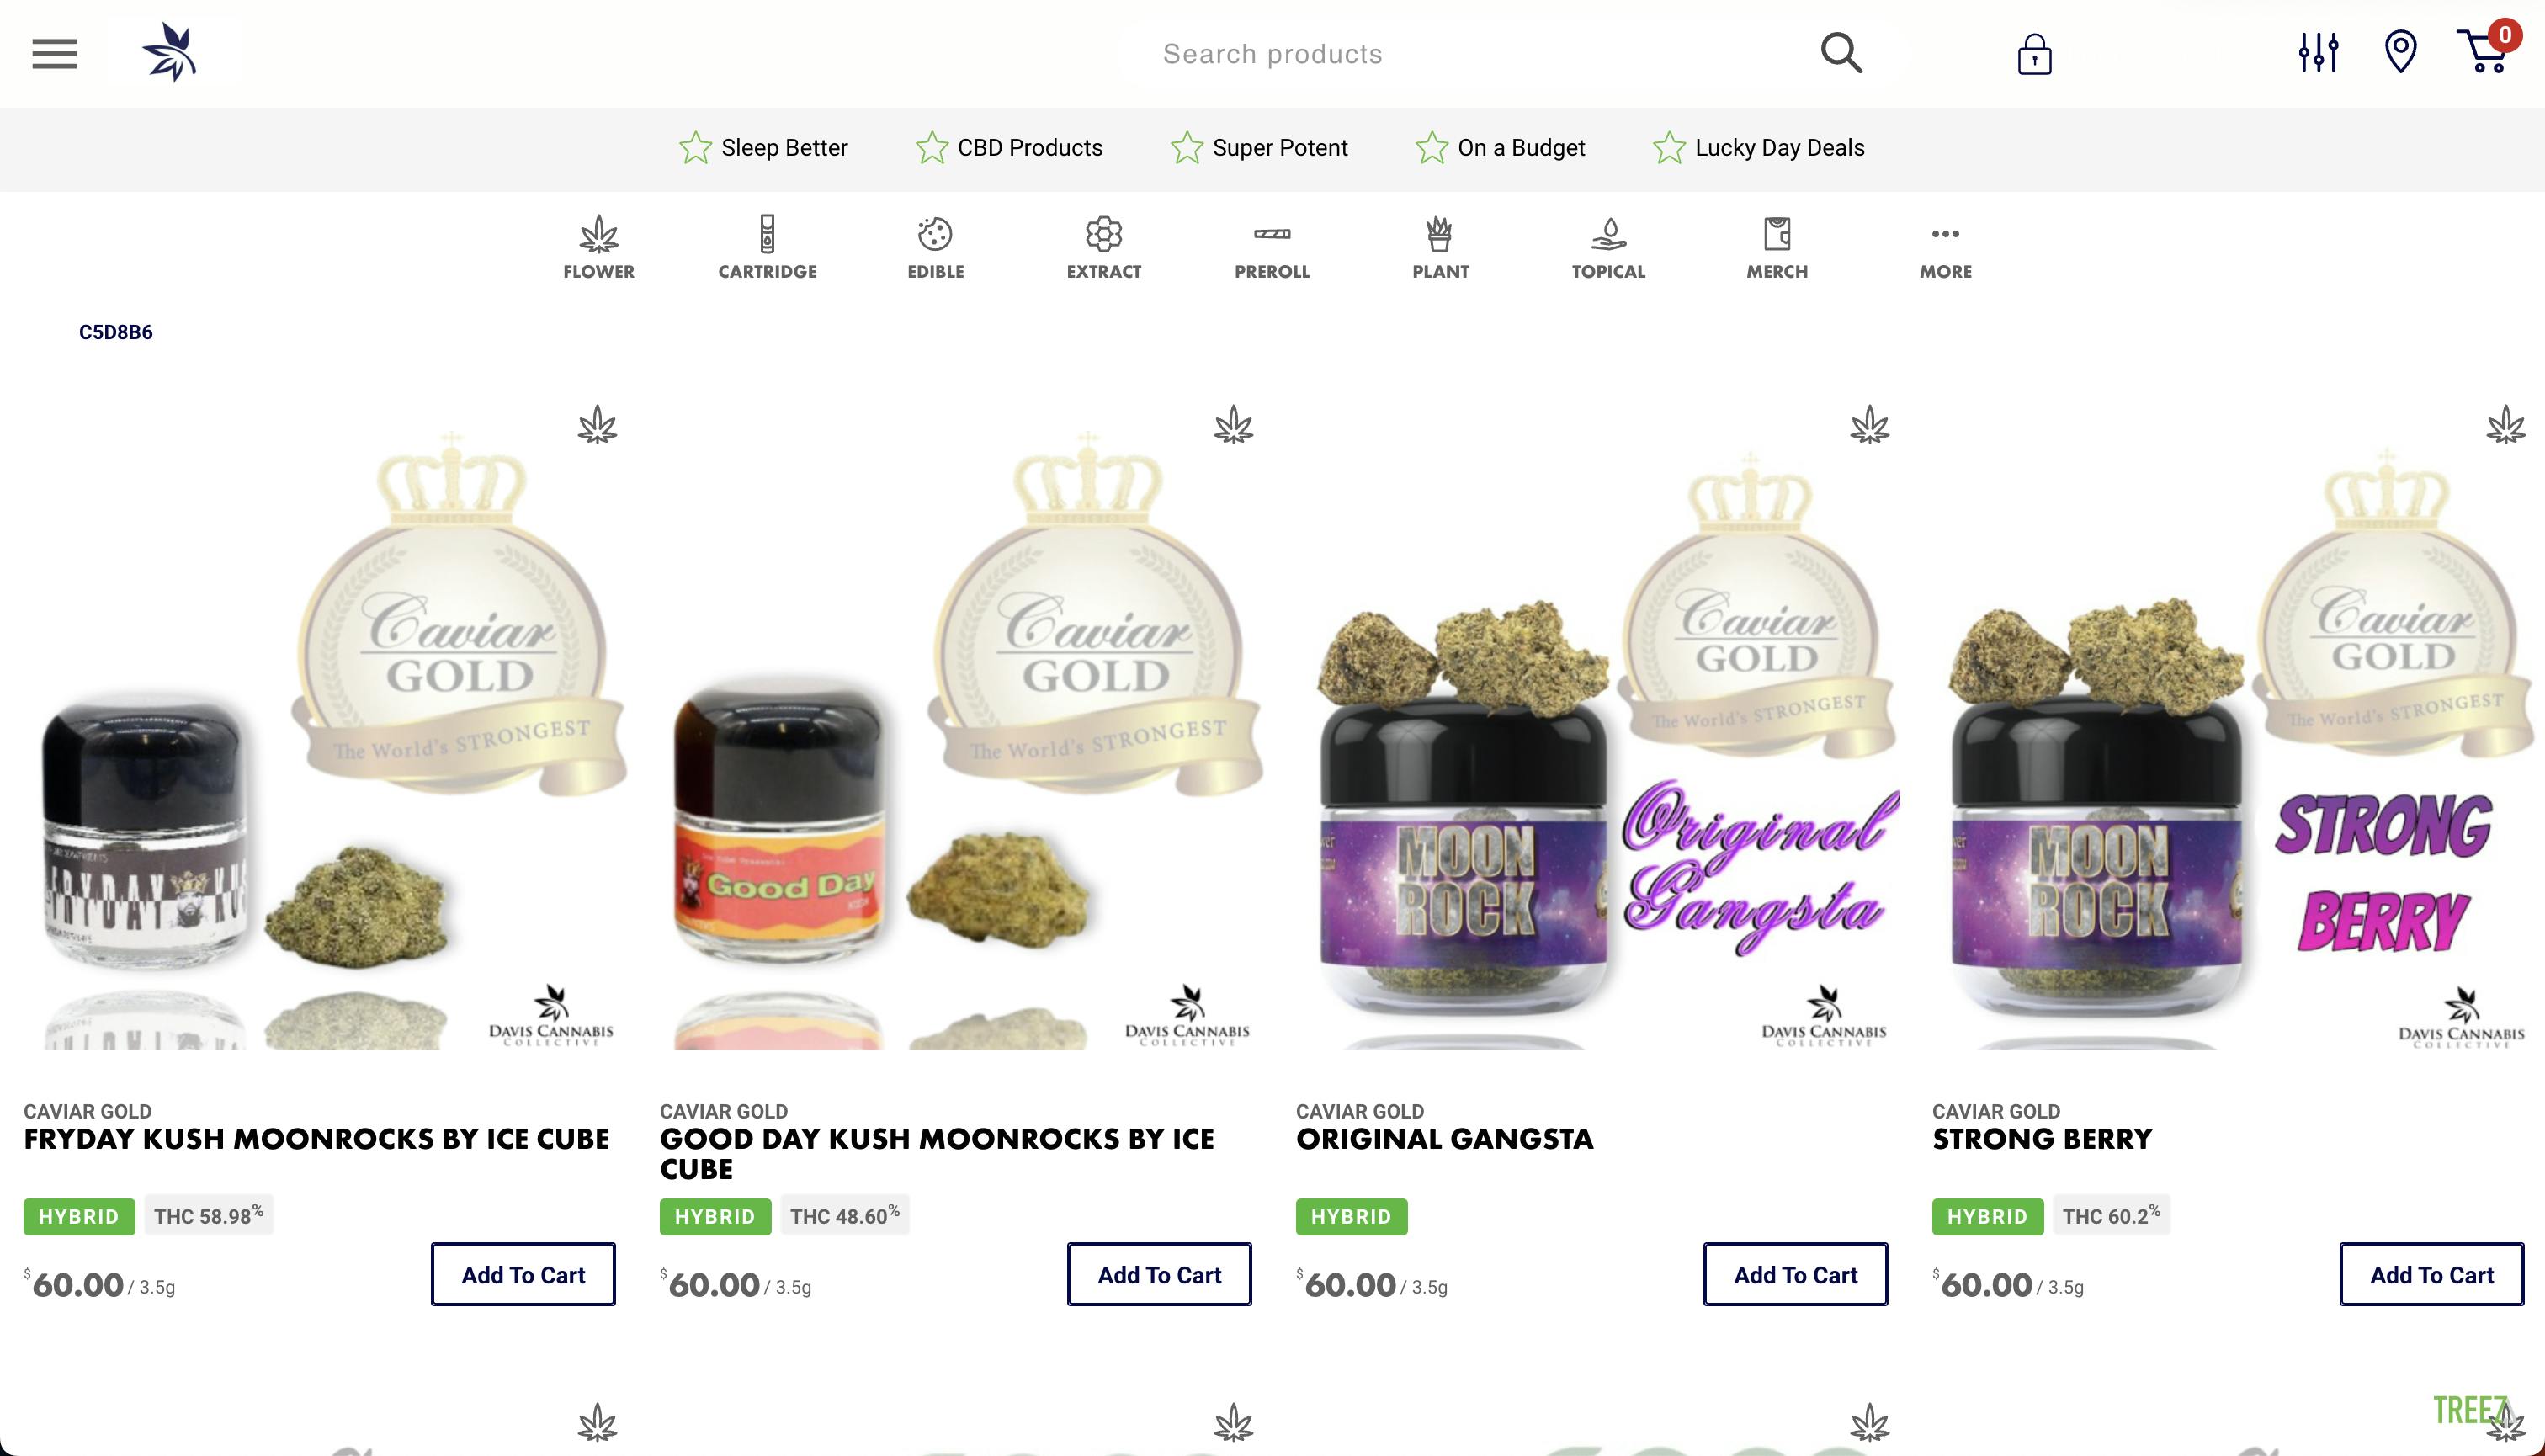 A screenshot of a Treez ecomm site for Davis Cannabis Club - three or four items of cannabis on sale plus icons for several different types of cannabis products are displayed